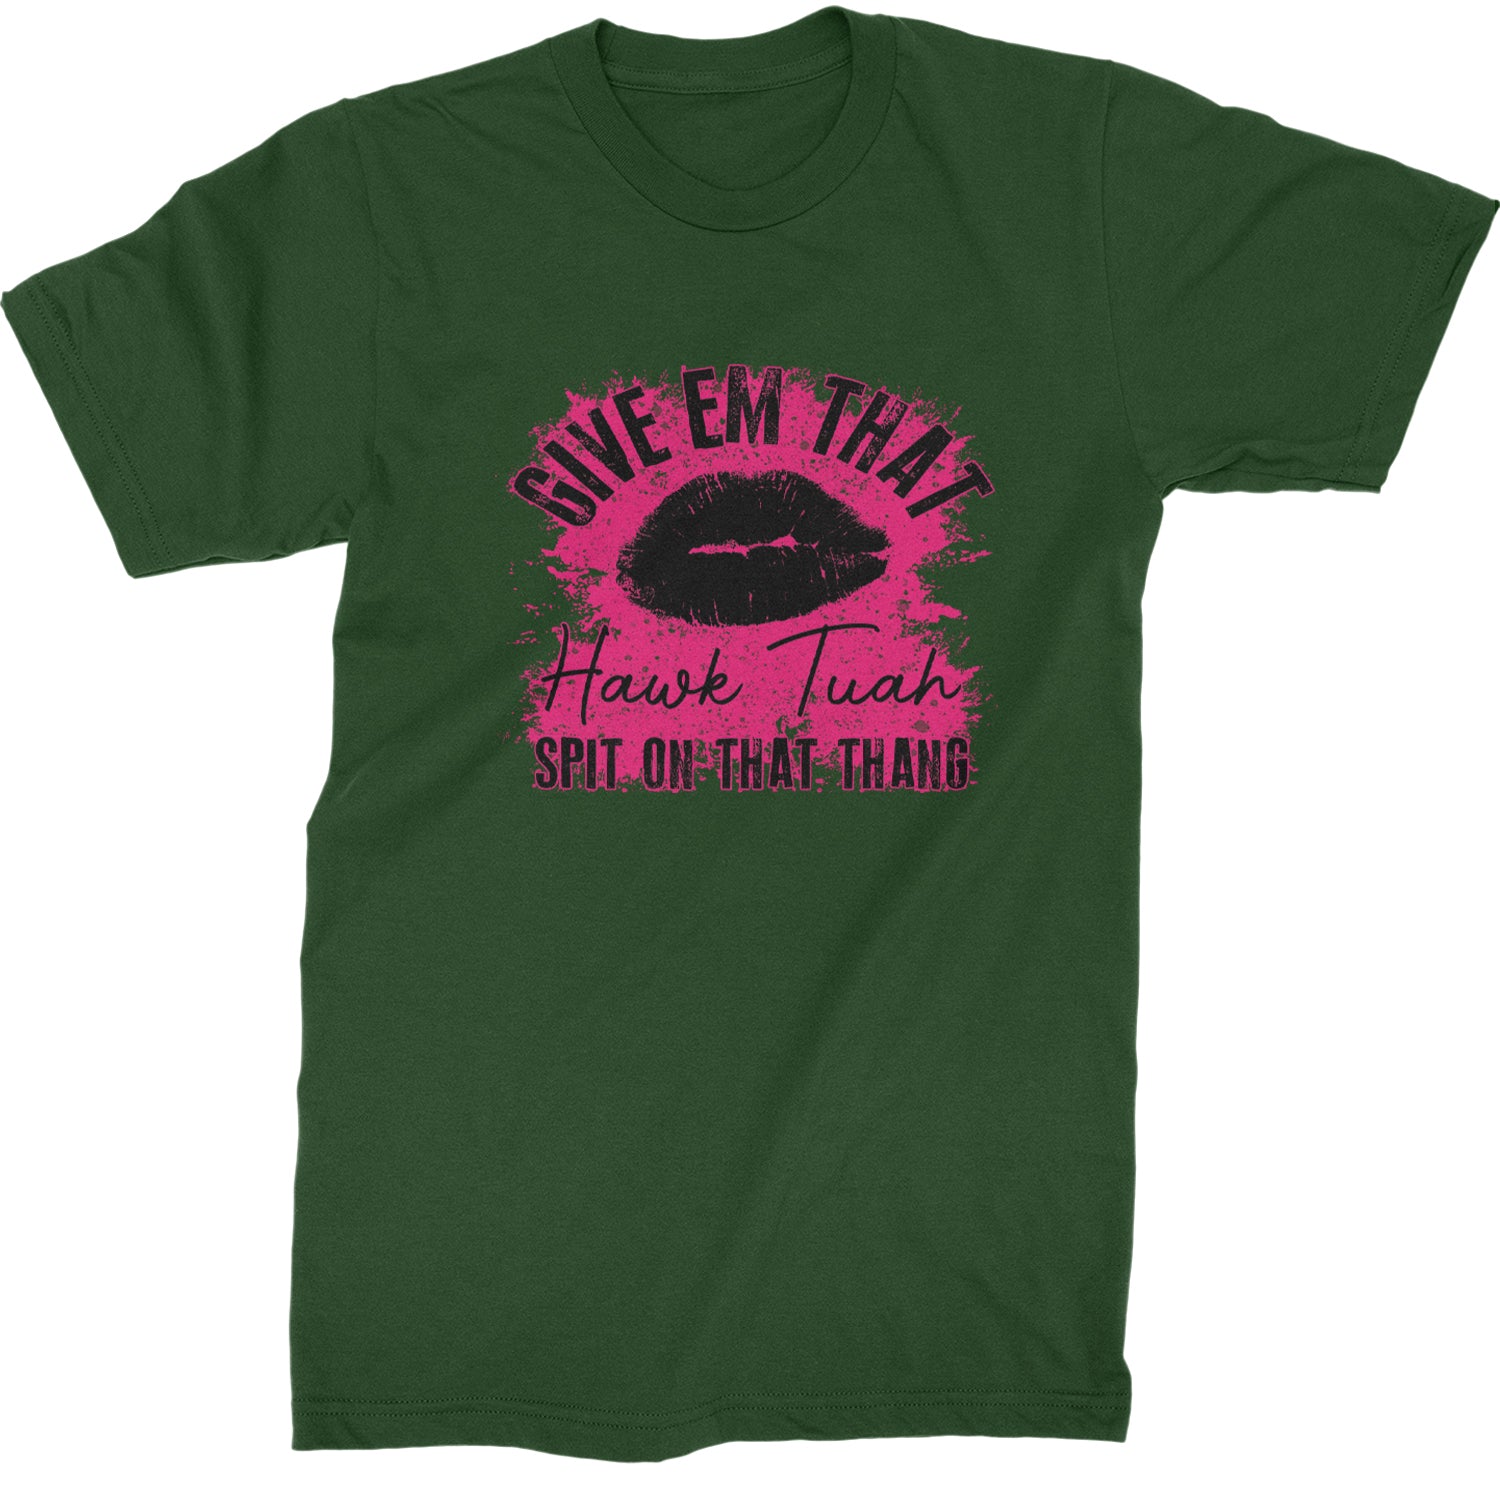 Give 'Em Hawk Tuah Spit On That Thang Mens T-shirt Forest Green